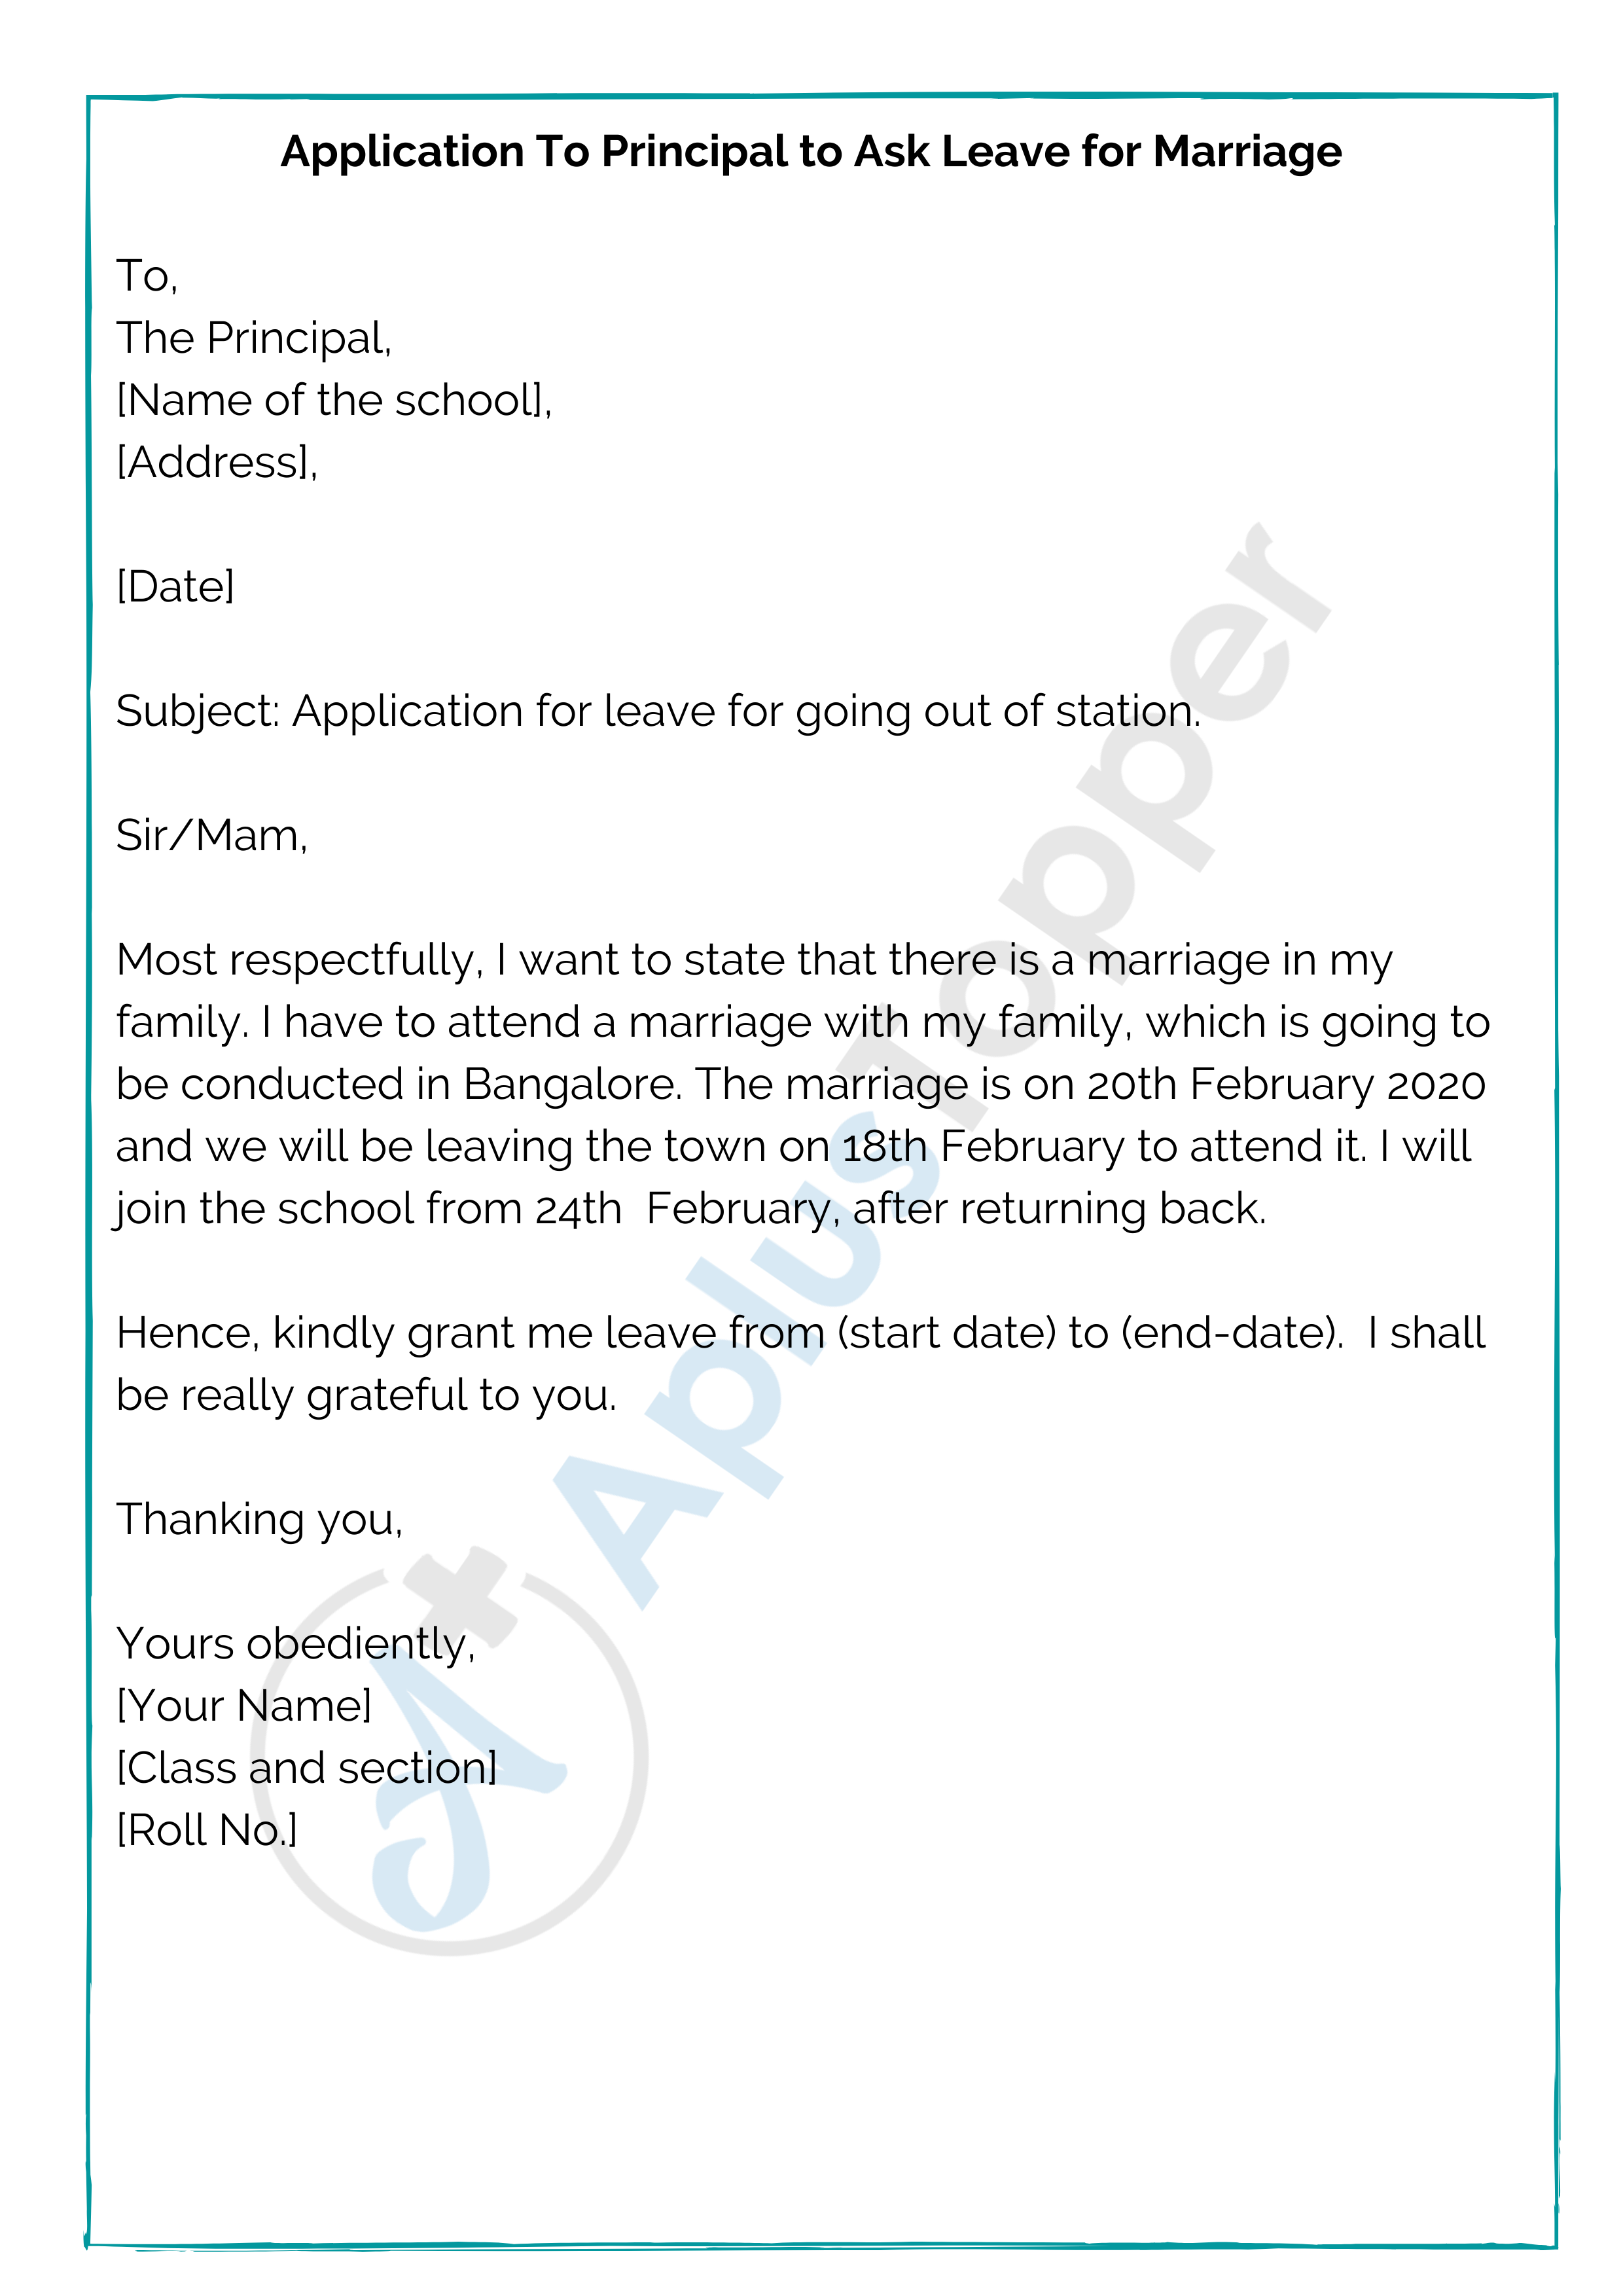 Application To Principal to Ask Leave for Marriage